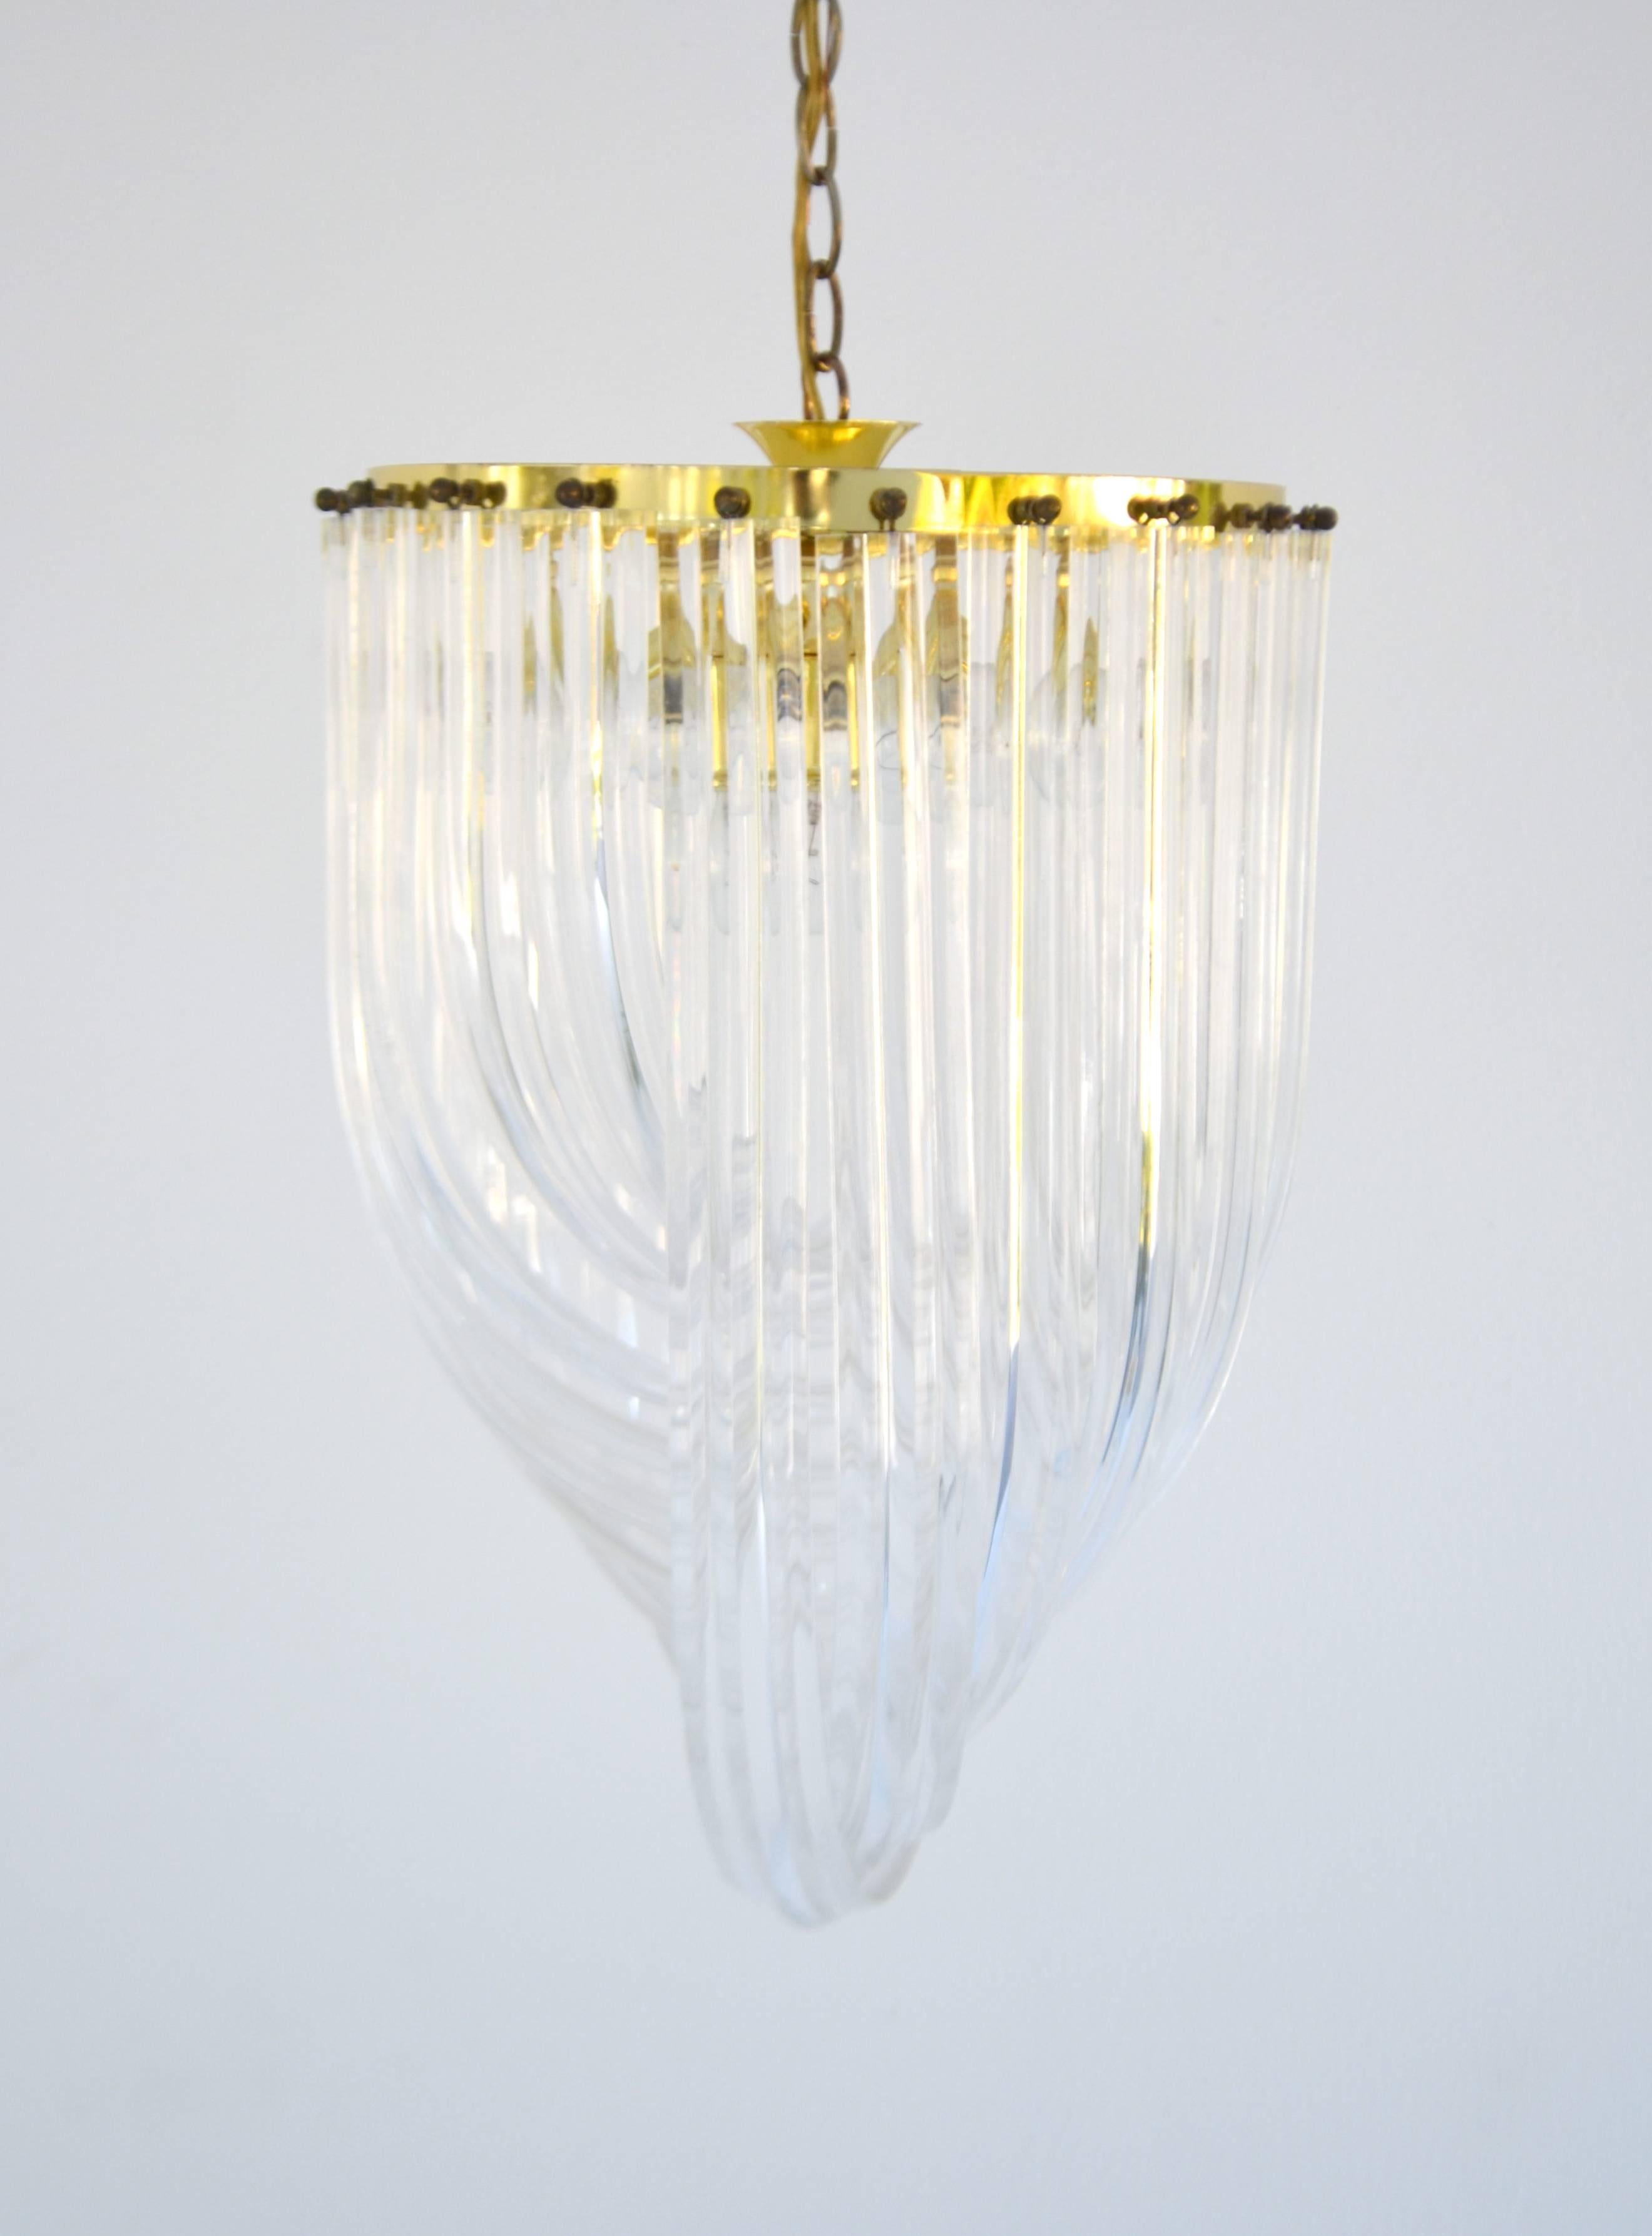 Glamorous Mid-Century acrylic crystal rod chandelier, circa 1960s - 1970s. This sculptural round chandelier is designed of intertwining loops of clear twisted lucite rods suspended from a brass frame.   
Measurements:
Overall: 14